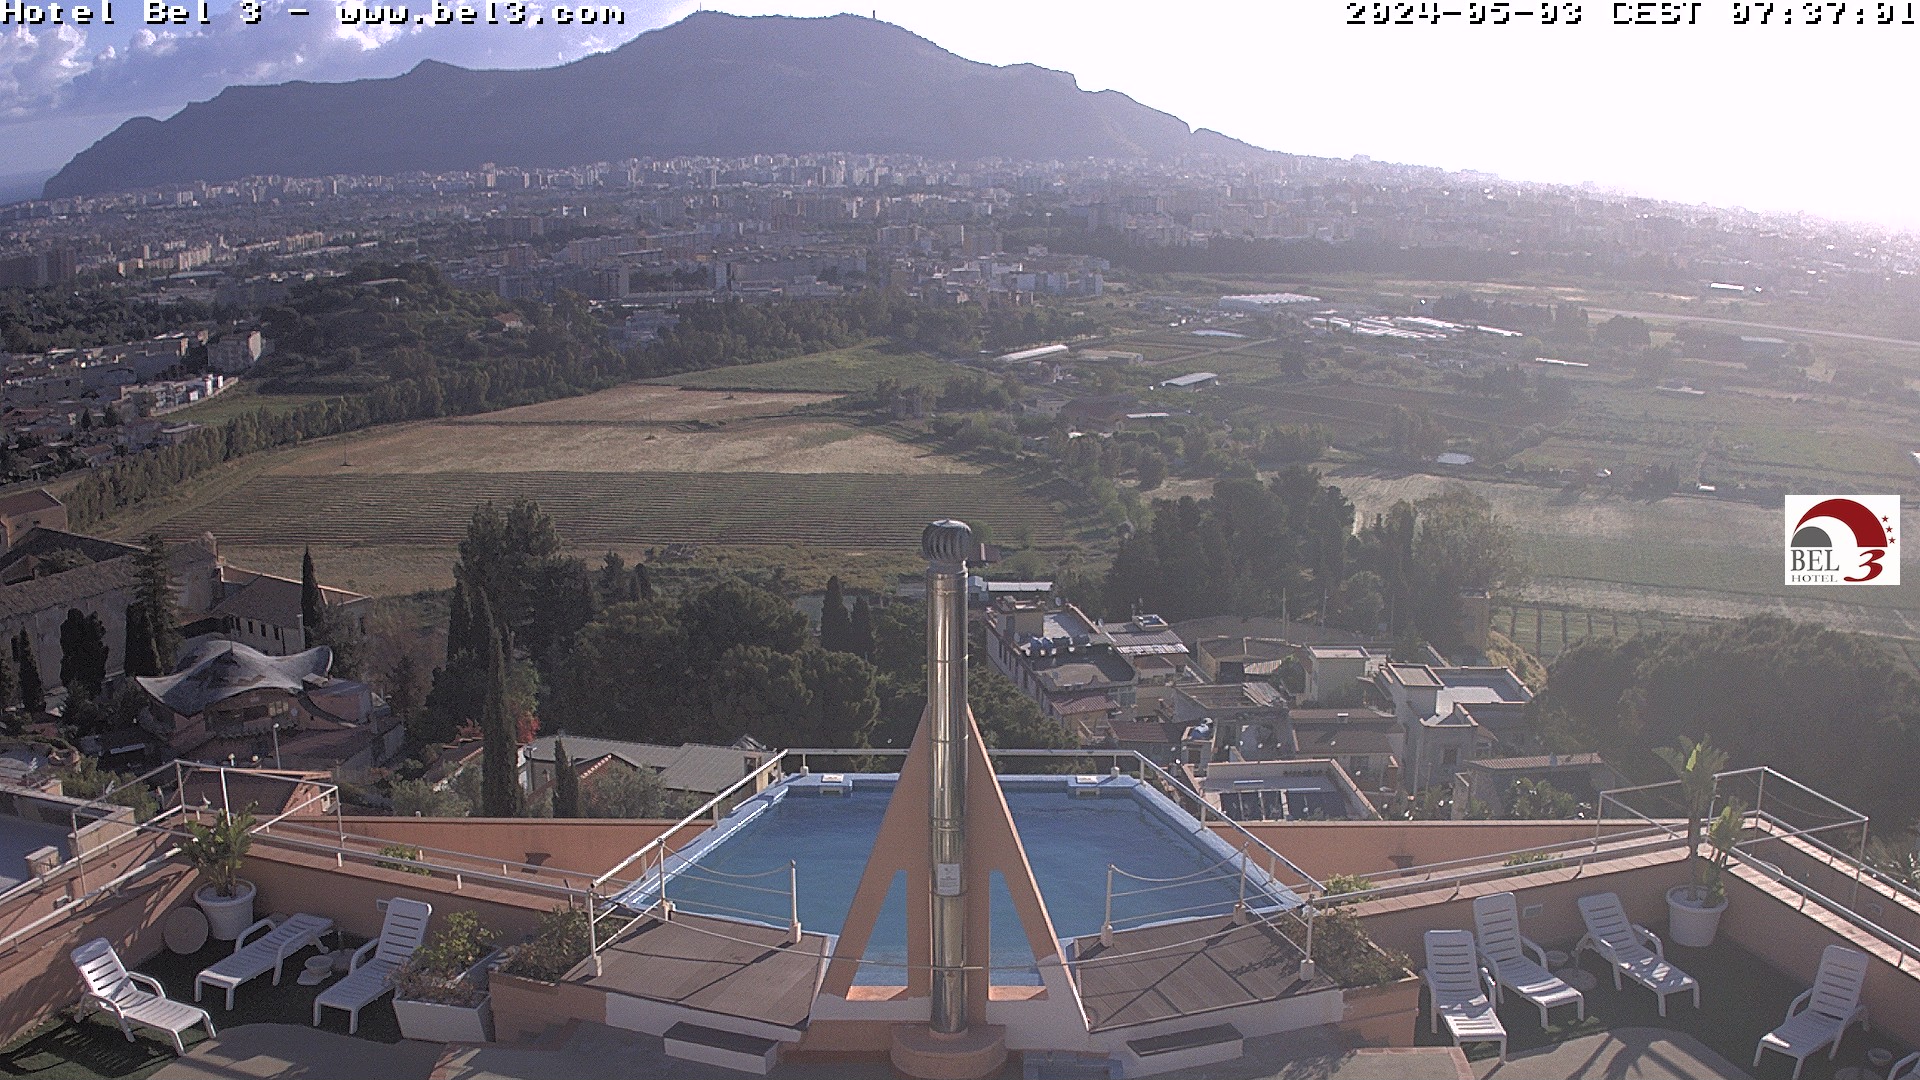 Webcam of the island of Sicily